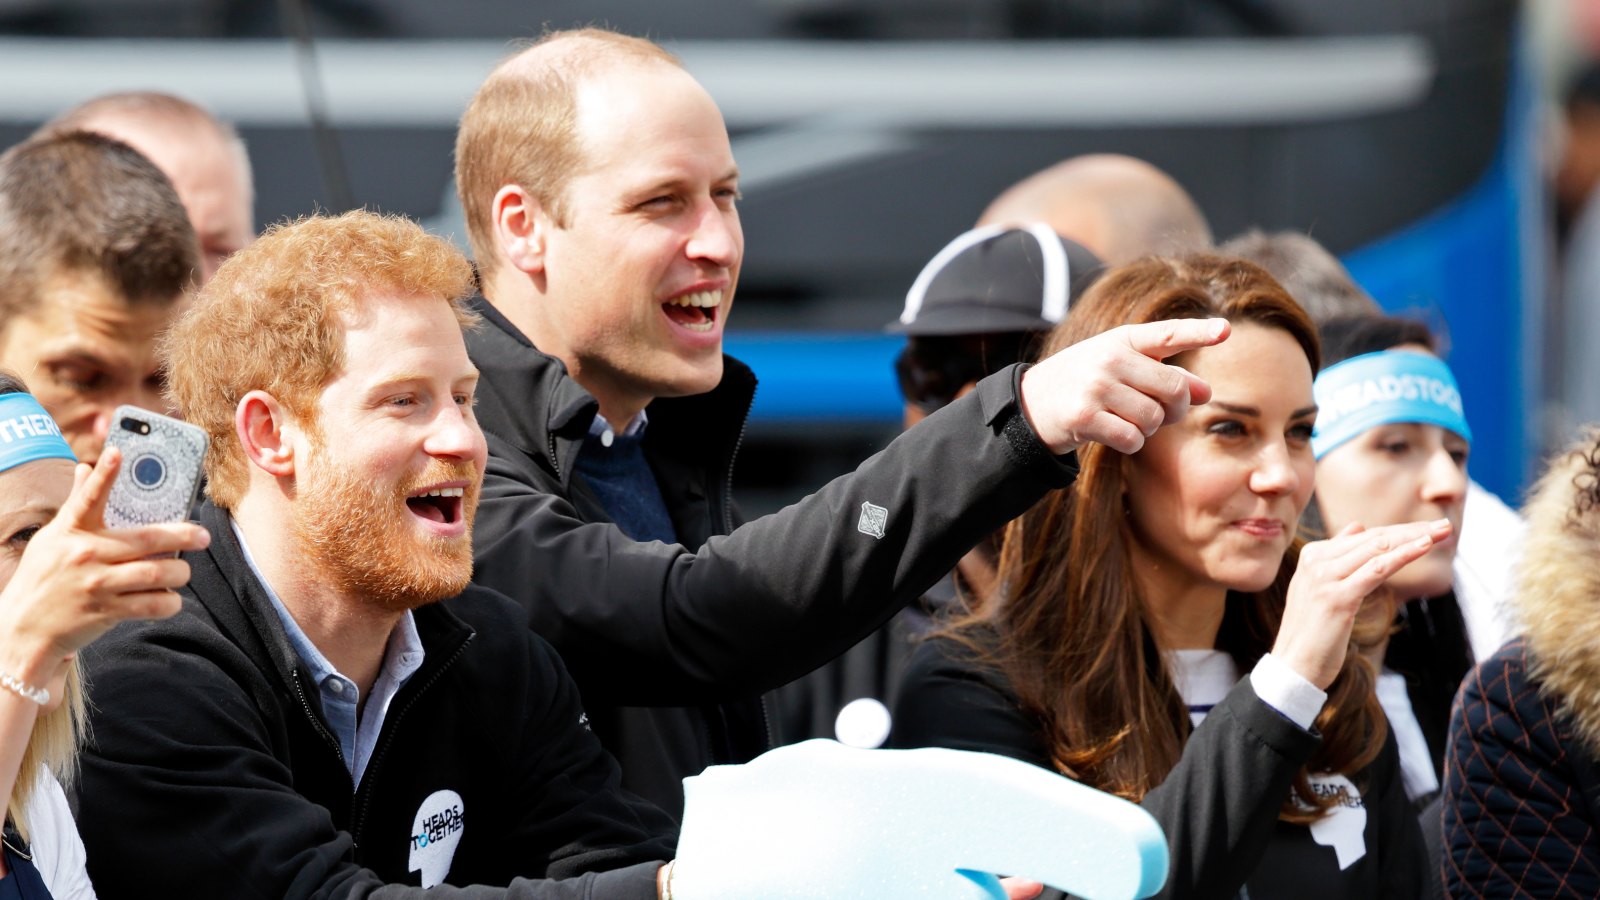 Prince Harry, Prince William, Duke of Cambridge and Catherine, Duchess of Cambridge cheer on runners talking part in the 2017 Virgin Money London Marathon on April 23, 2017 in London, England.